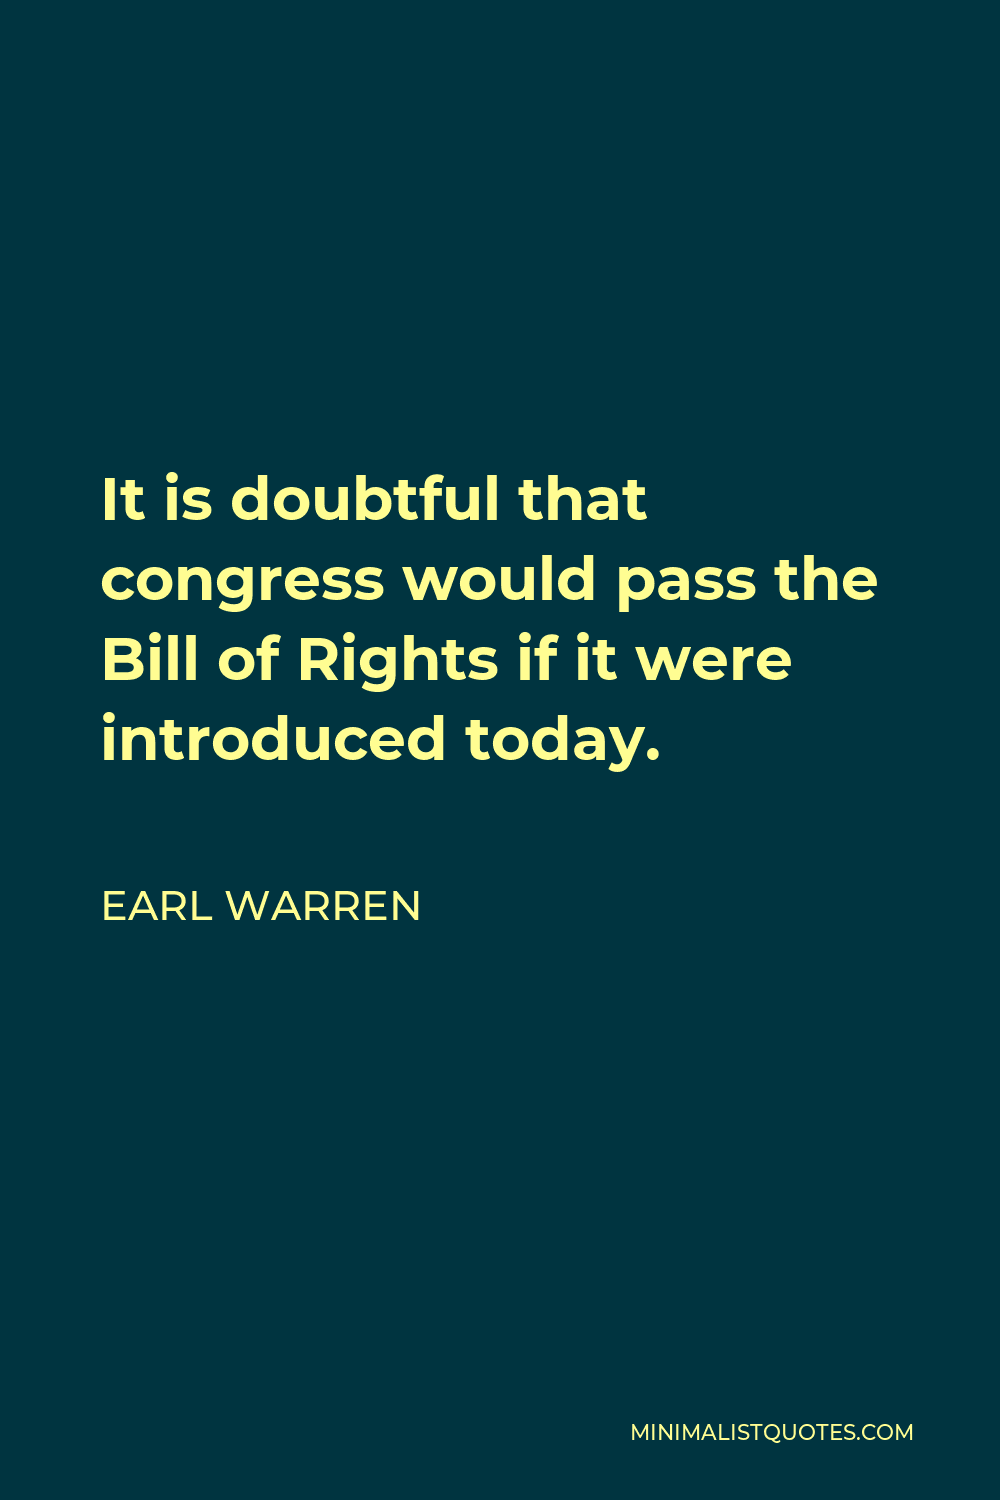 Earl Warren Quote - It is doubtful that congress would pass the Bill of Rights if it were introduced today.